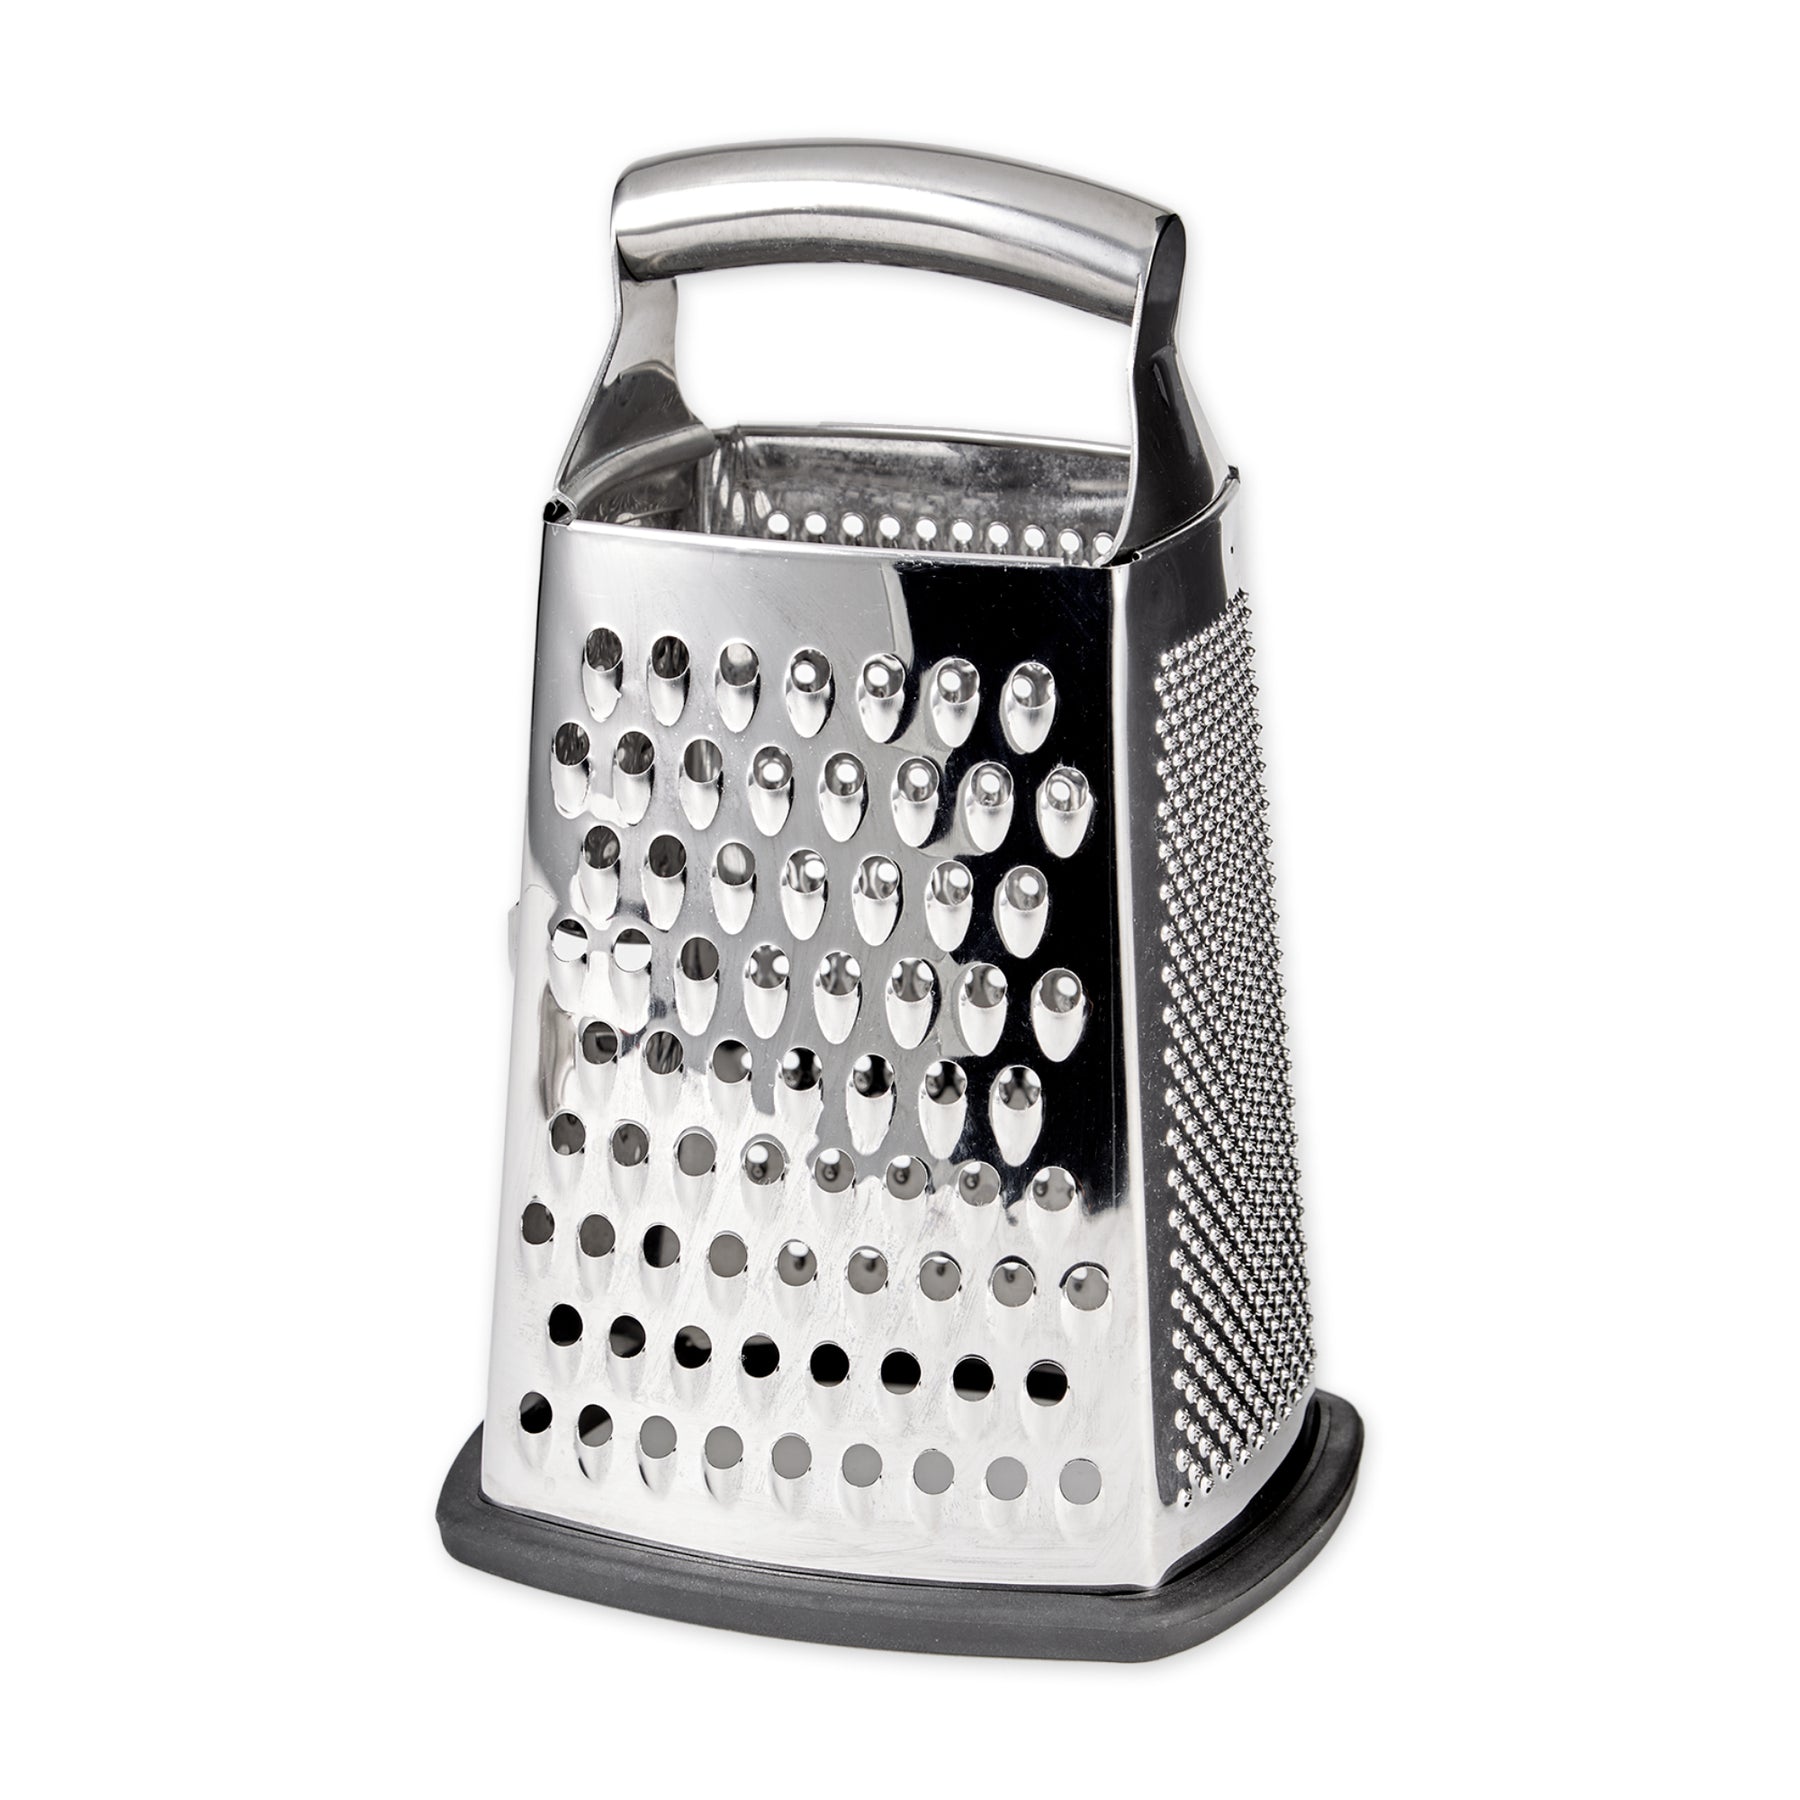 Big 12 800W Single-phase cheese grater with reverse function